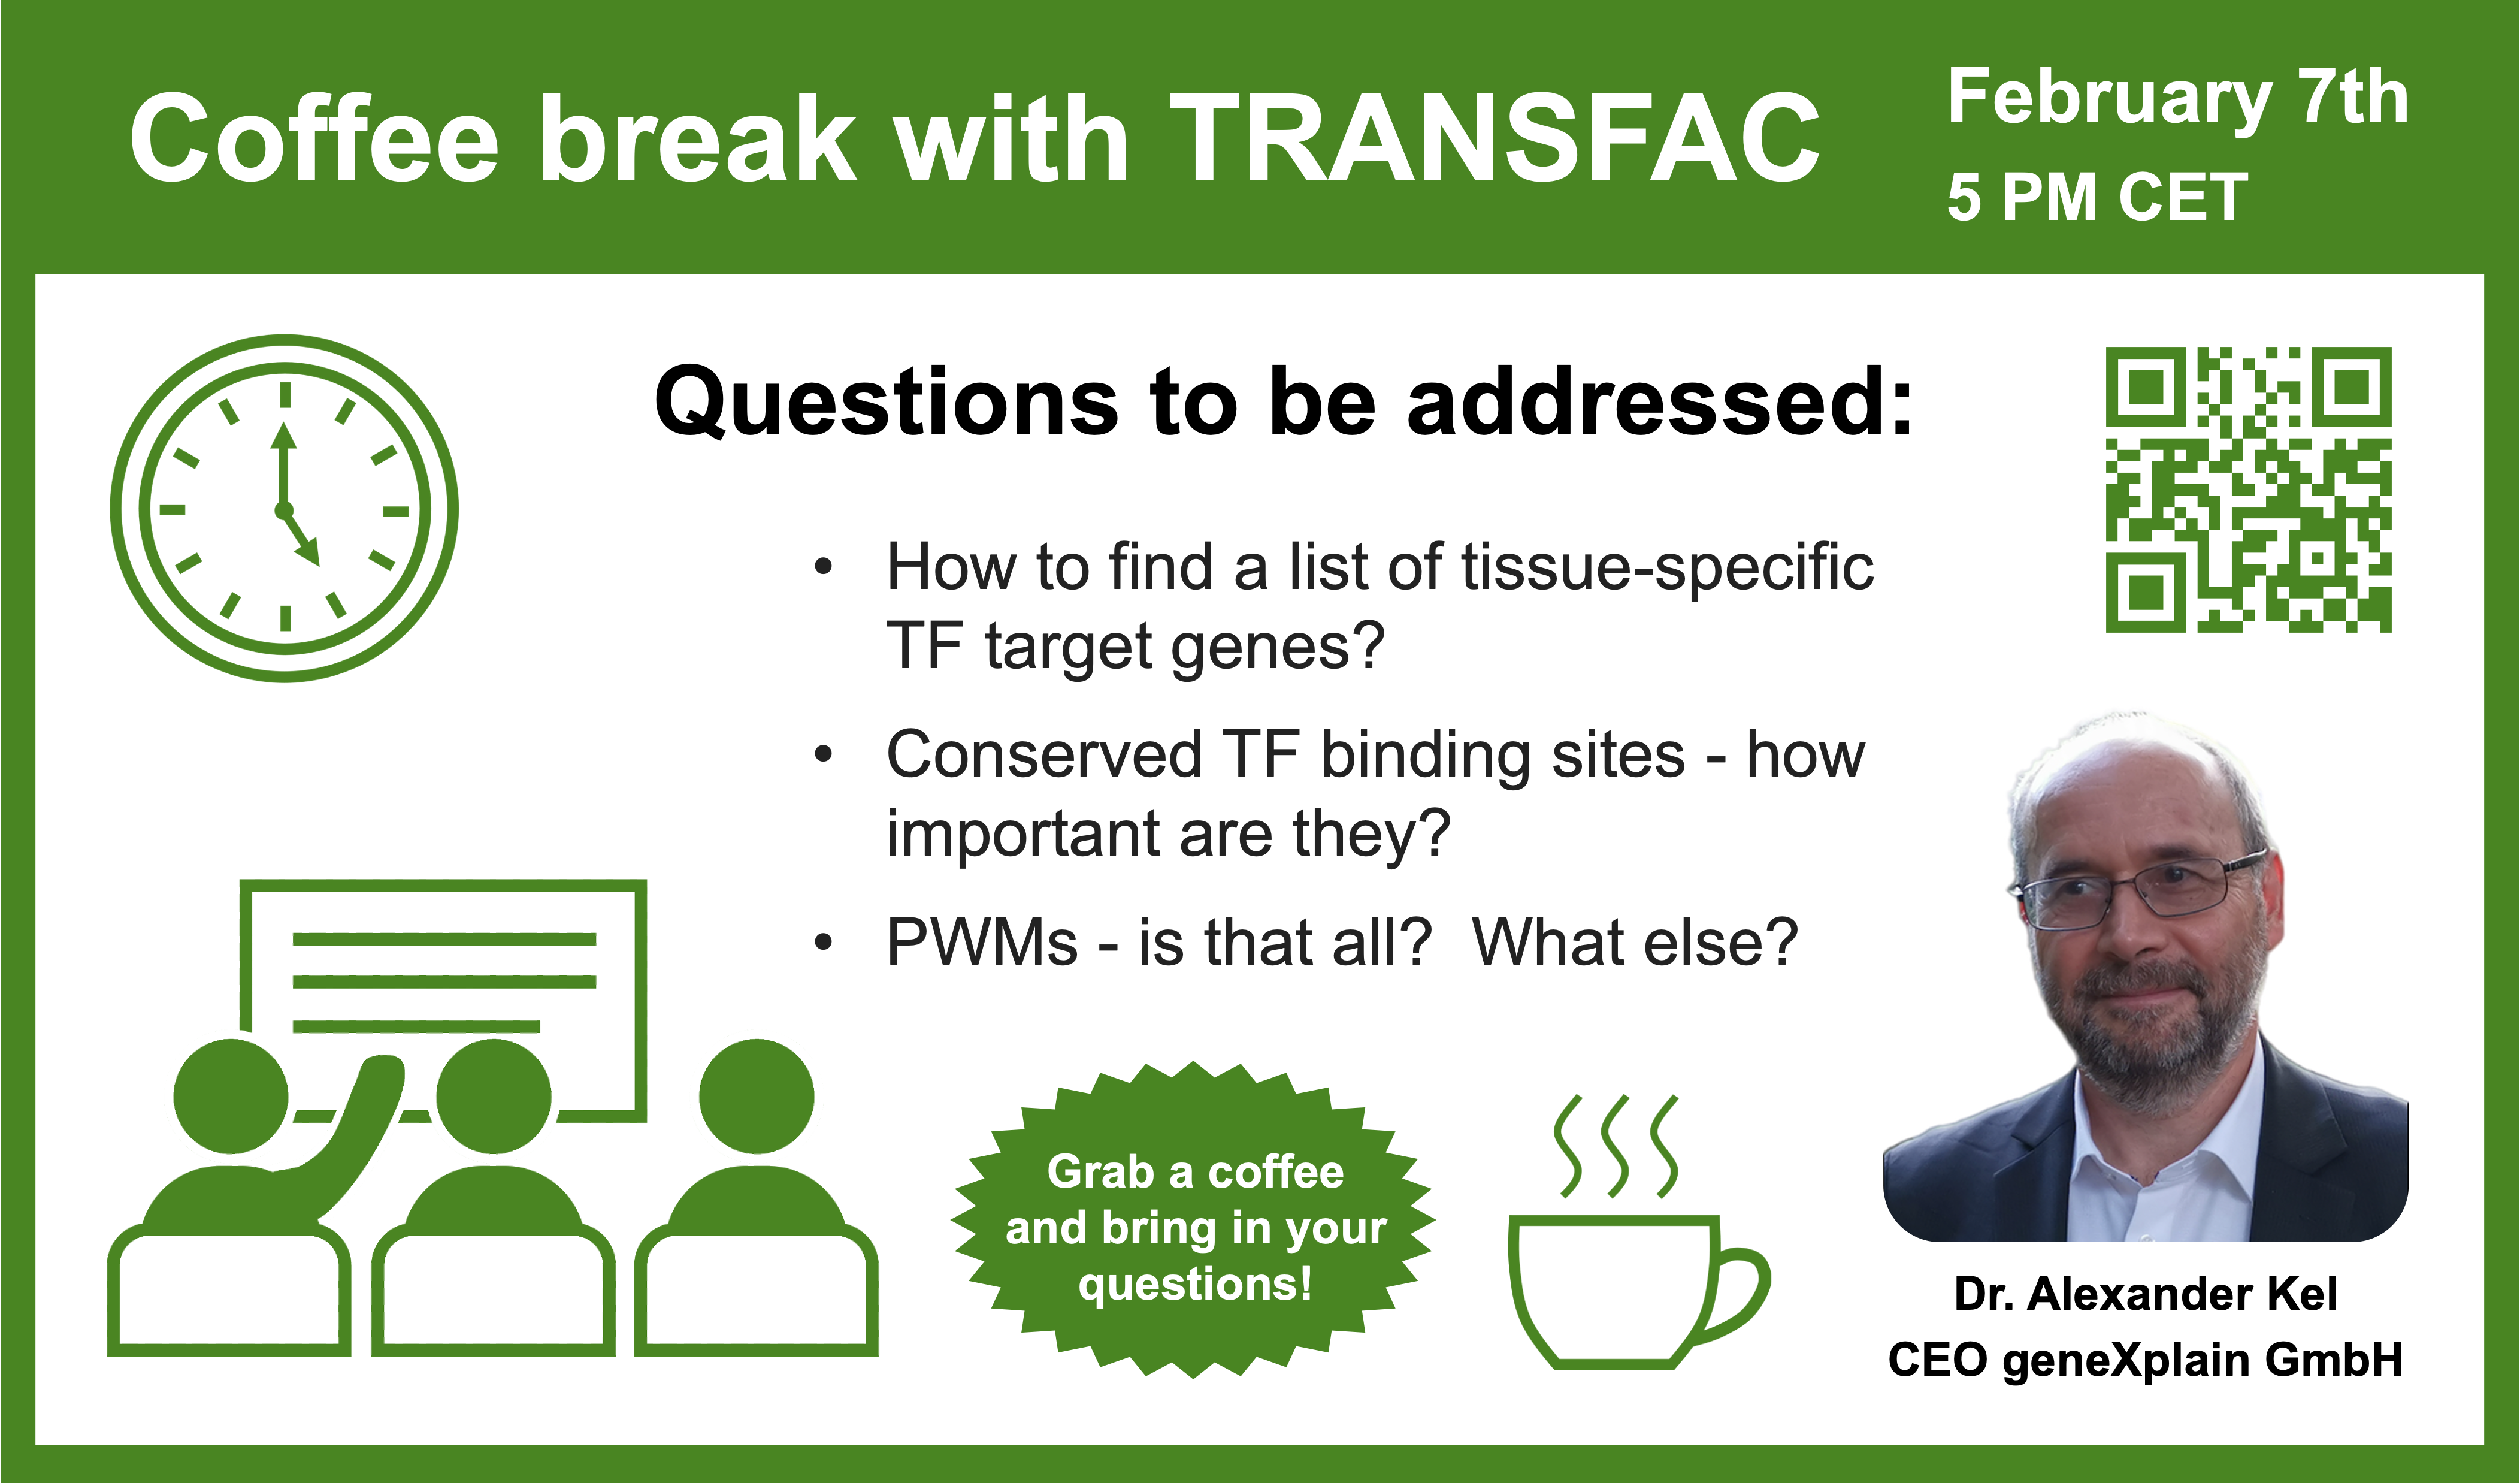 Second coffee break with TRANSFAC